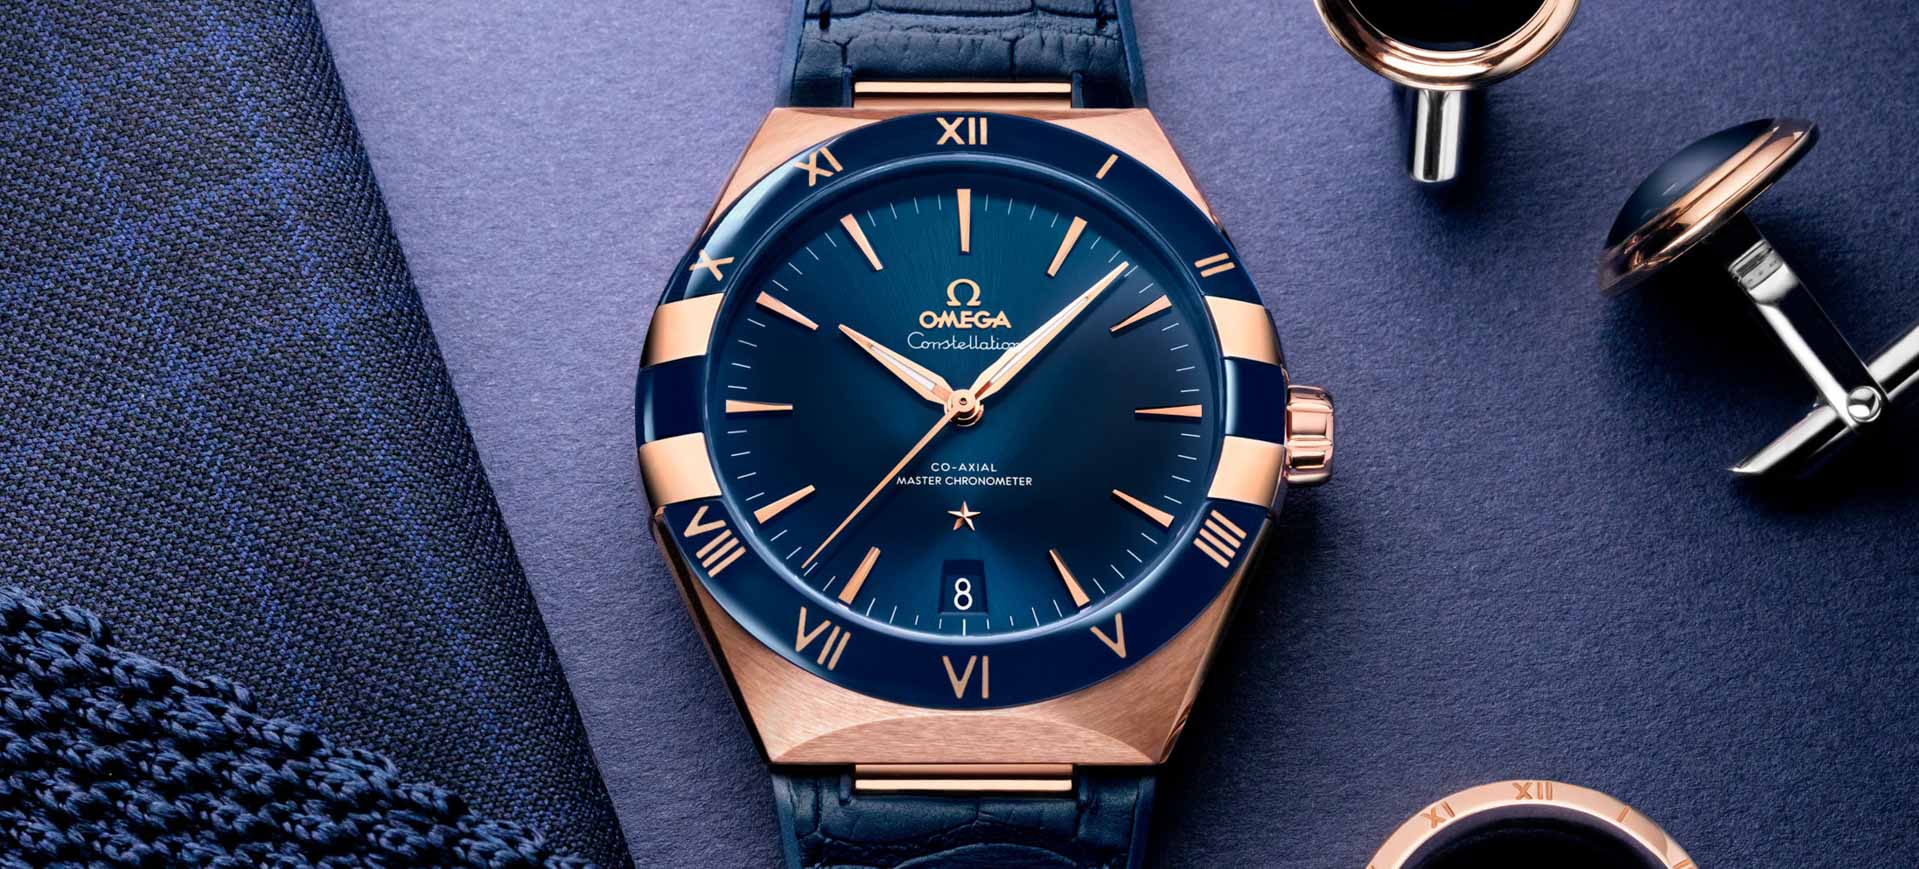 omega new collection 2019